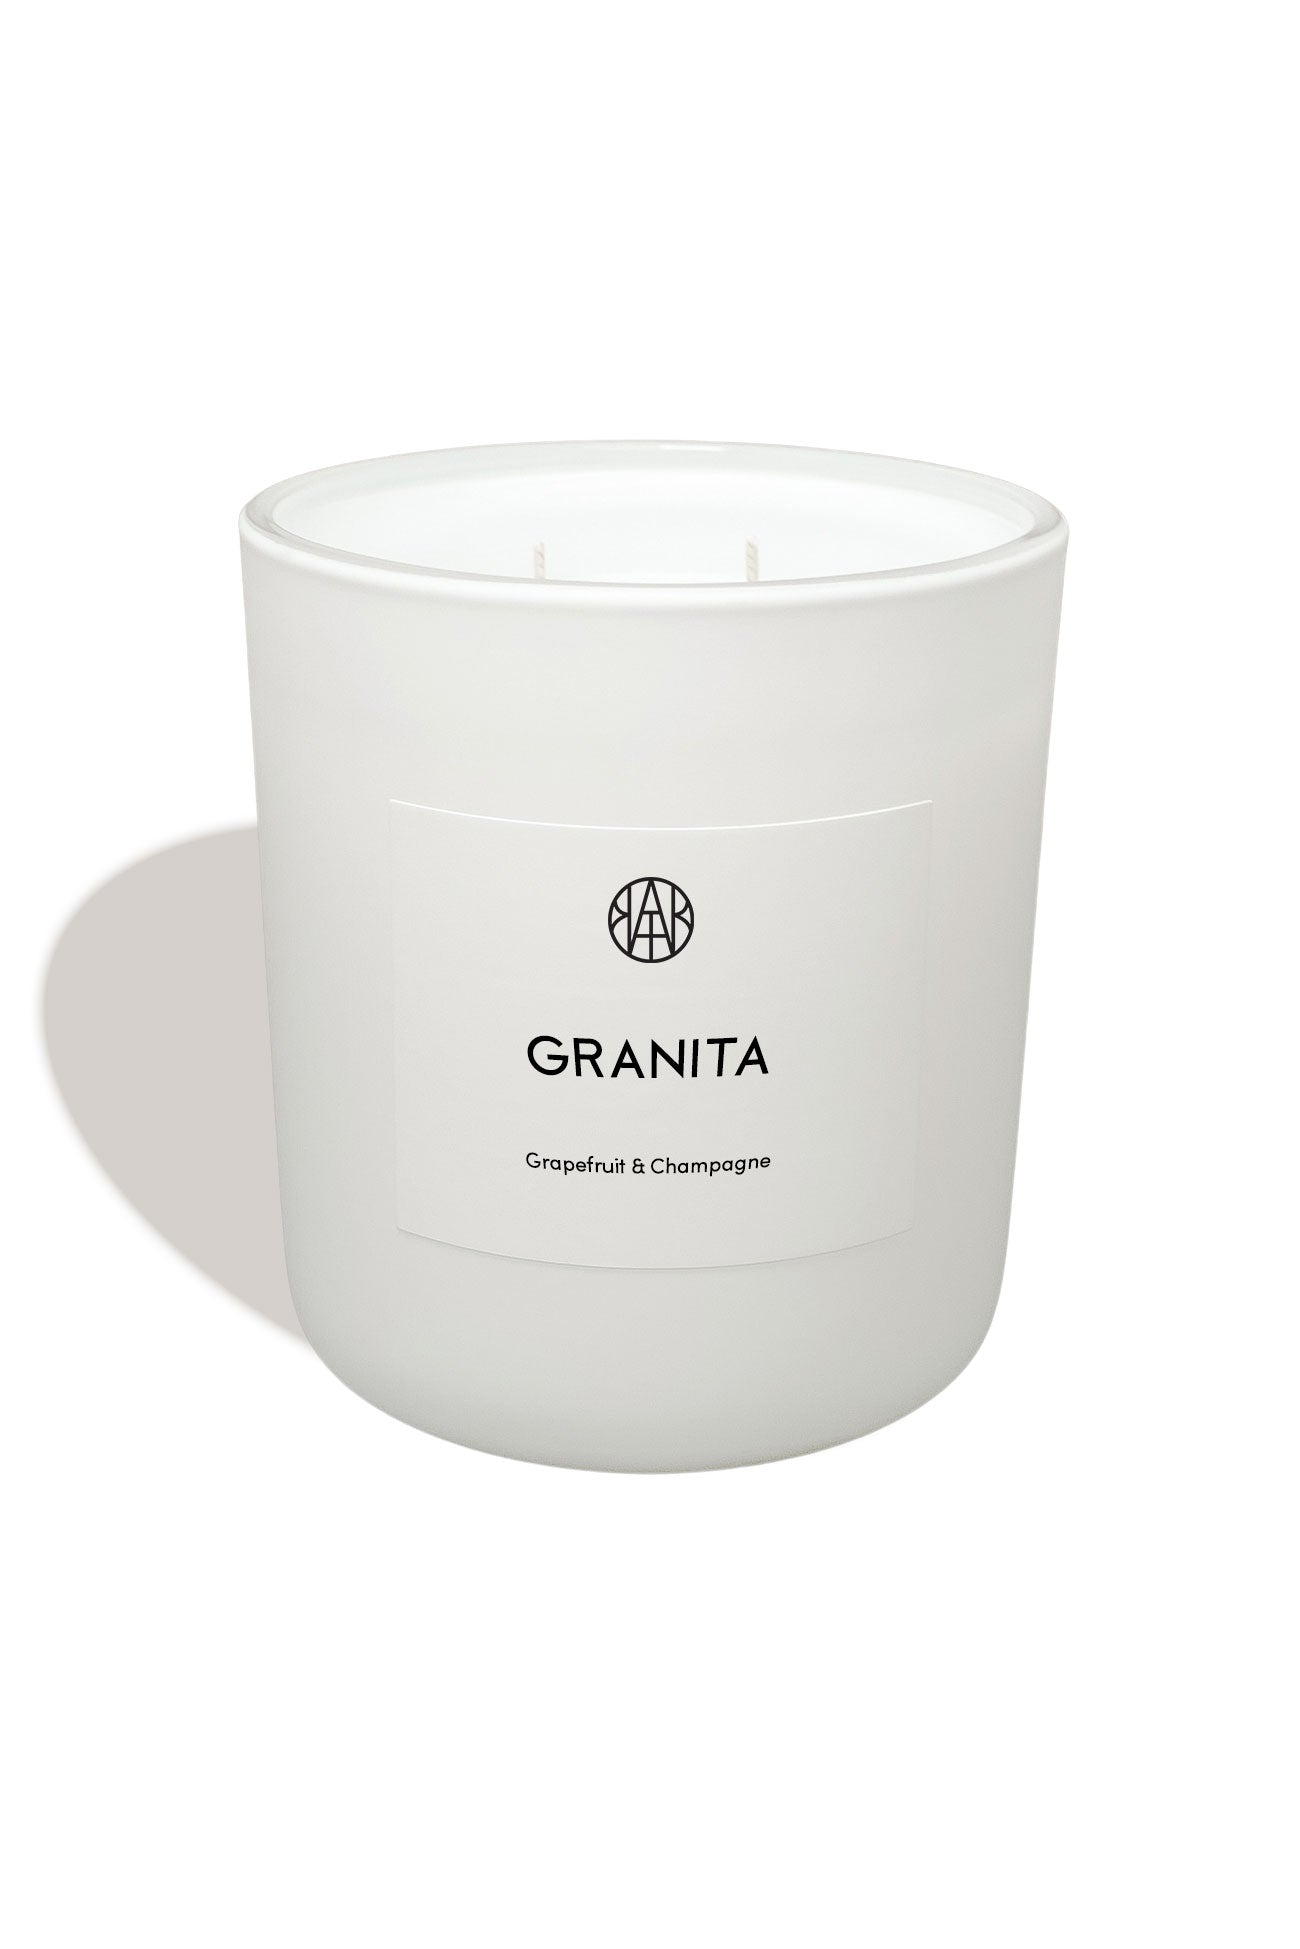 GRANITA - Deluxe Candle - AEMBR - Clean Luxury Candles, Wax Melts & Laundry Care